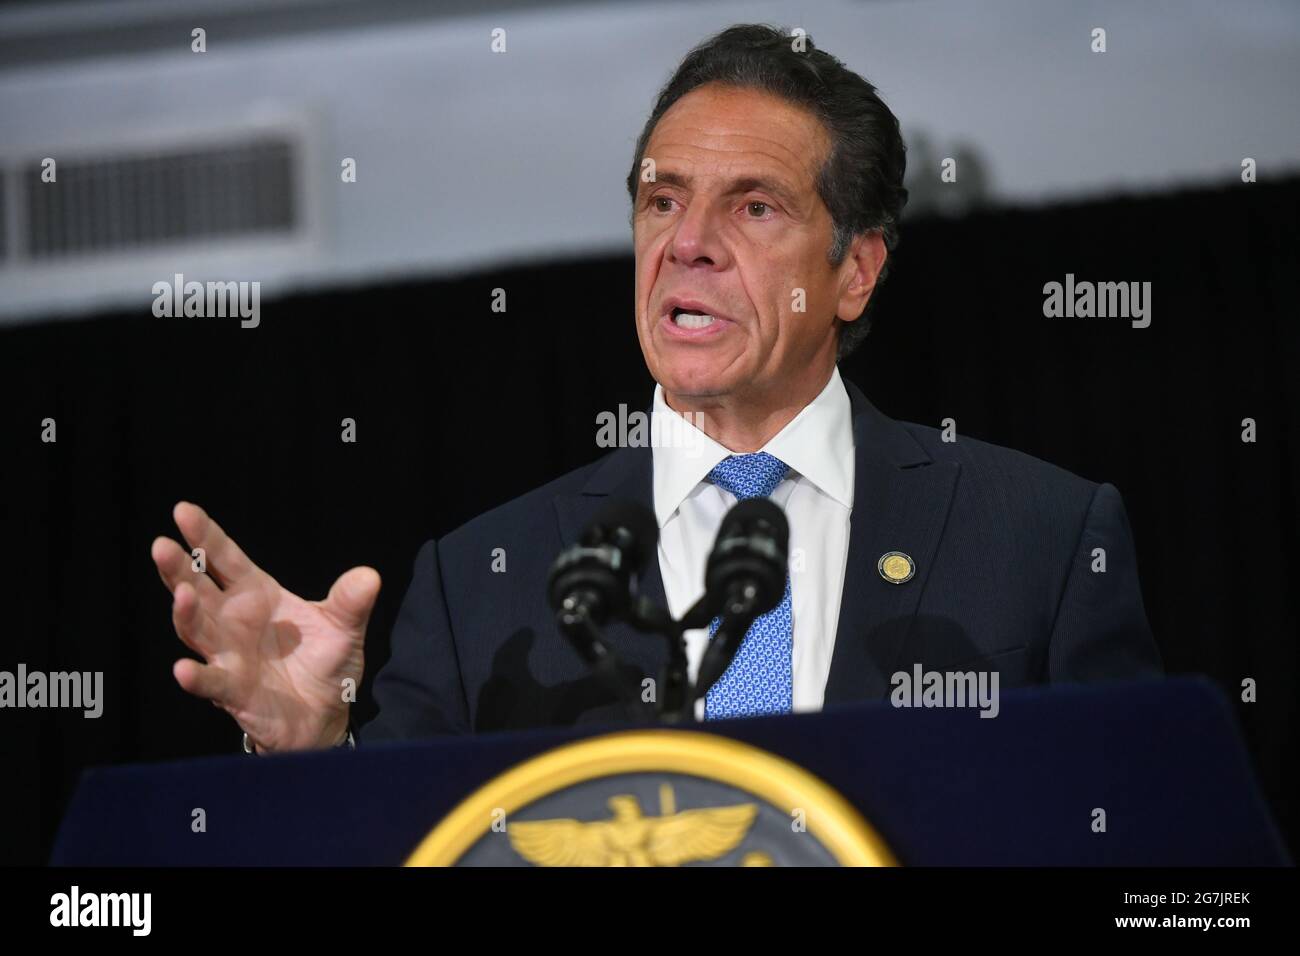 Governor Andrew Cuomo holds a press conference at the Lenox Road Baptist Church on July 14, 2021 in New York. Governor Cuomo met with elected official Stock Photo